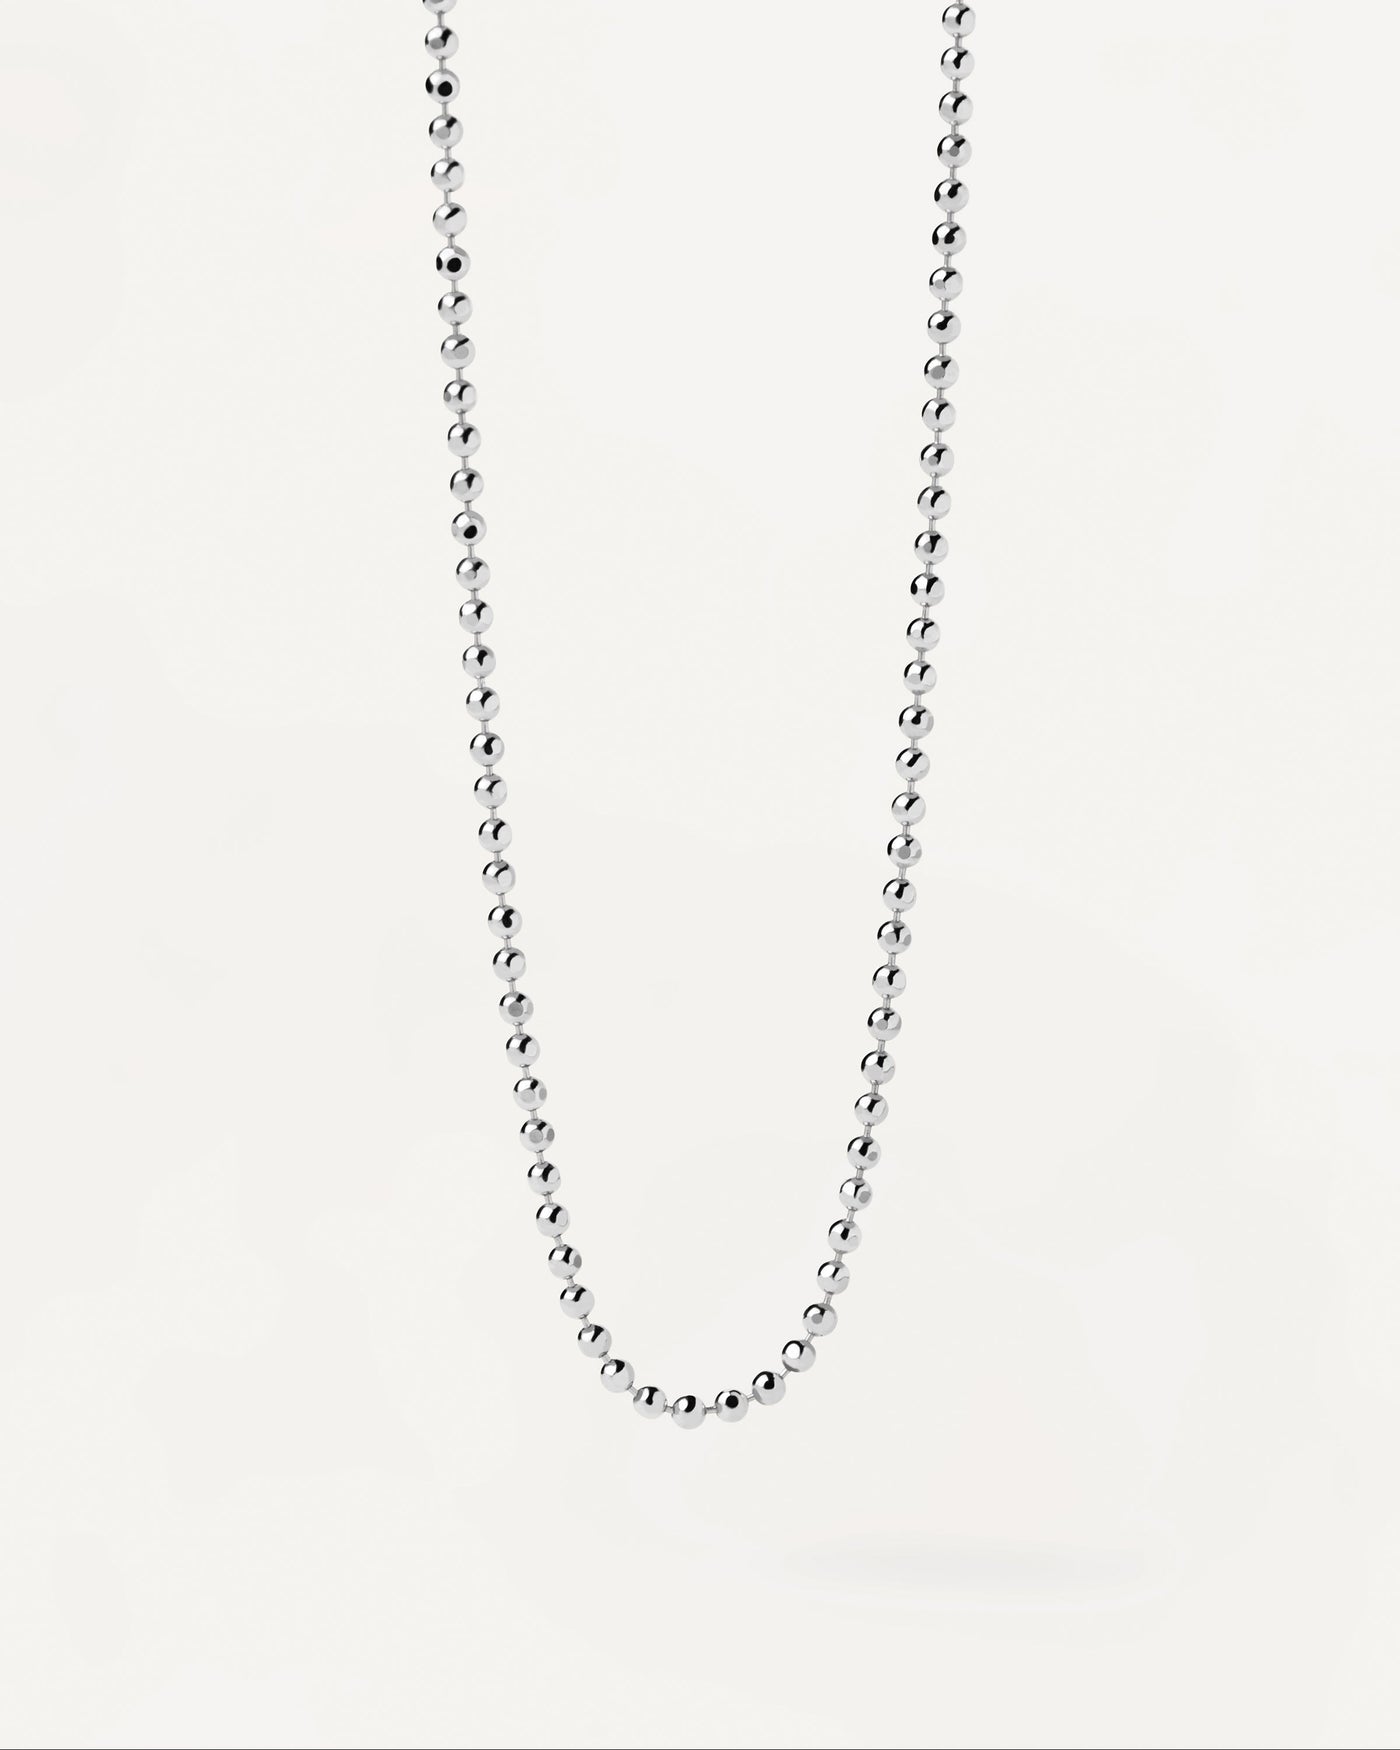 2023 Selection | Ball Chain Silver Necklace. Ball-textured chain necklace in plain sterling silver. Get the latest arrival from PDPAOLA. Place your order safely and get this Best Seller. Free Shipping.